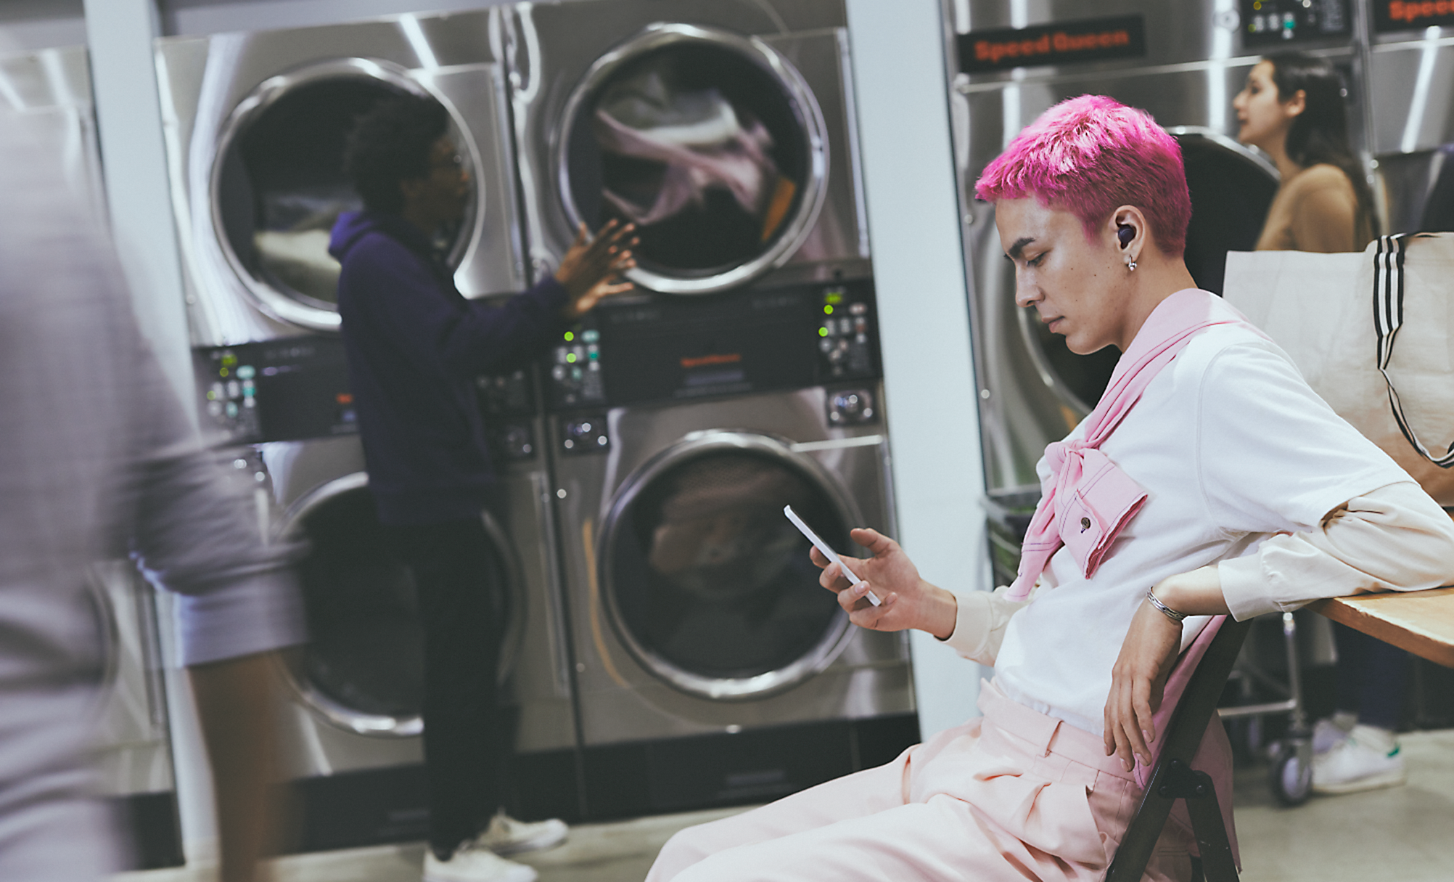 Image of a person sitting in a launderette looking at their phone and wearing WF-C700N Wireless Noise Cancelling headphones